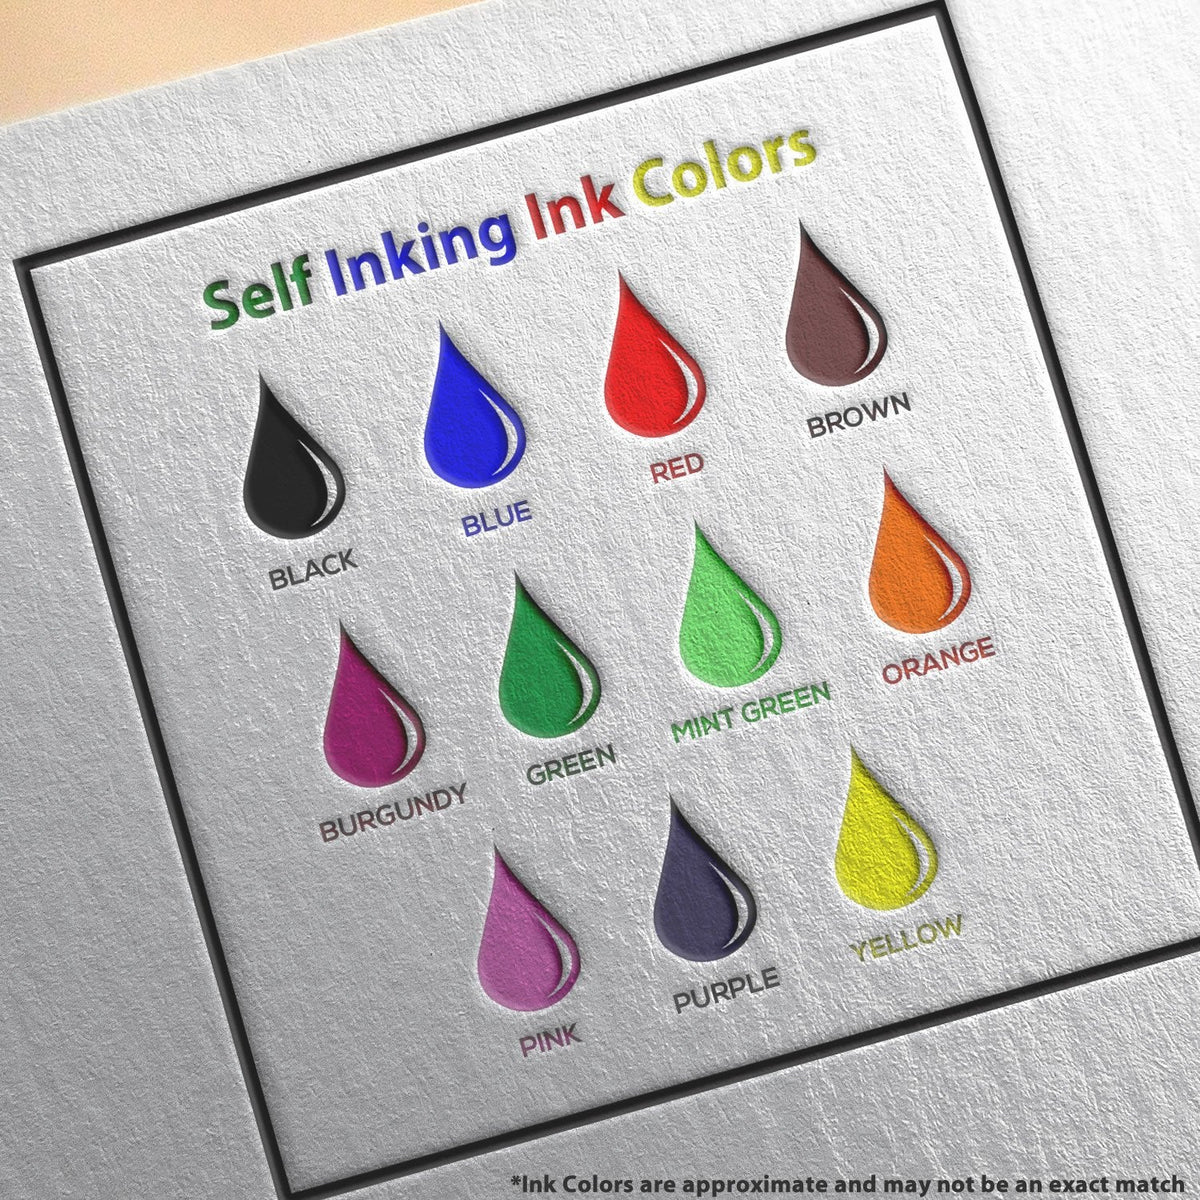 Self-Inking Paid with Checkmark Stamp Ink Color Options